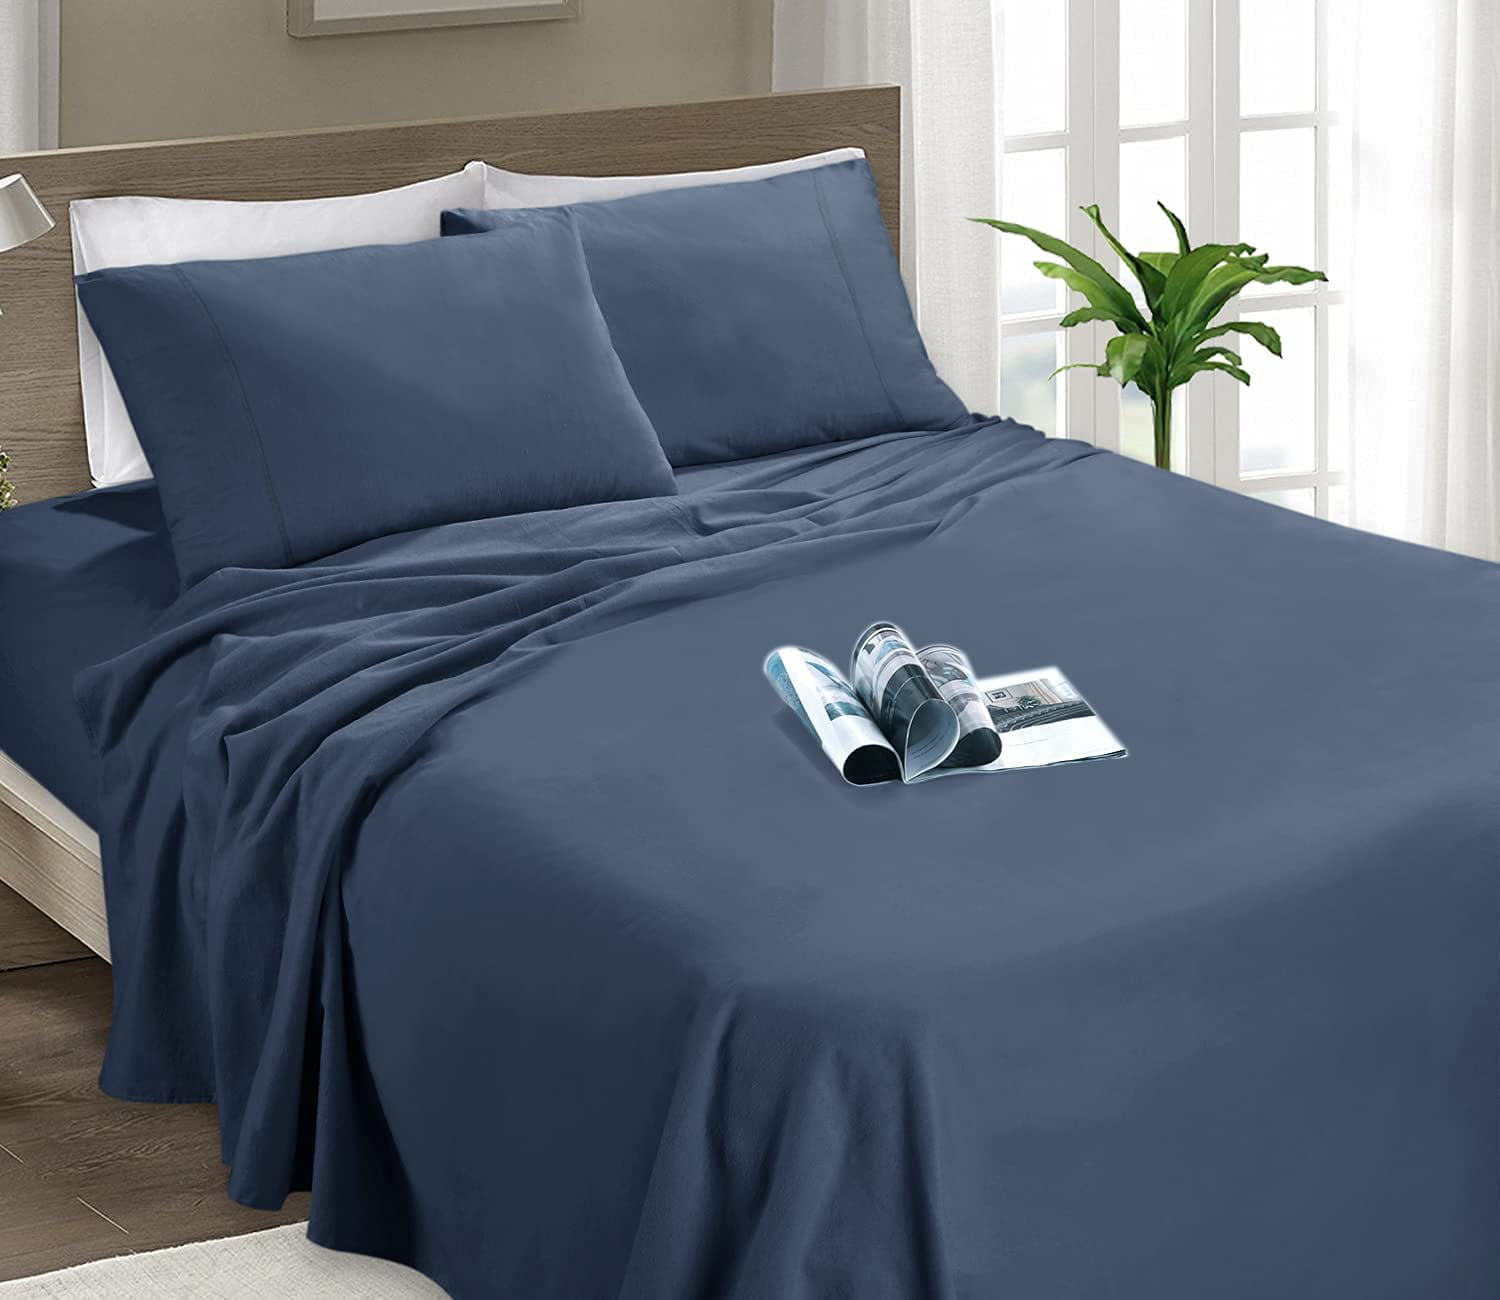 Easy Care and Fade Resistant 4-Piece Flannel Sheet Set-Soft & Comfortable Microfiber Bedding Sheet Jean Blue, Queen Ultra Warm & Luxurious Bedding Collection